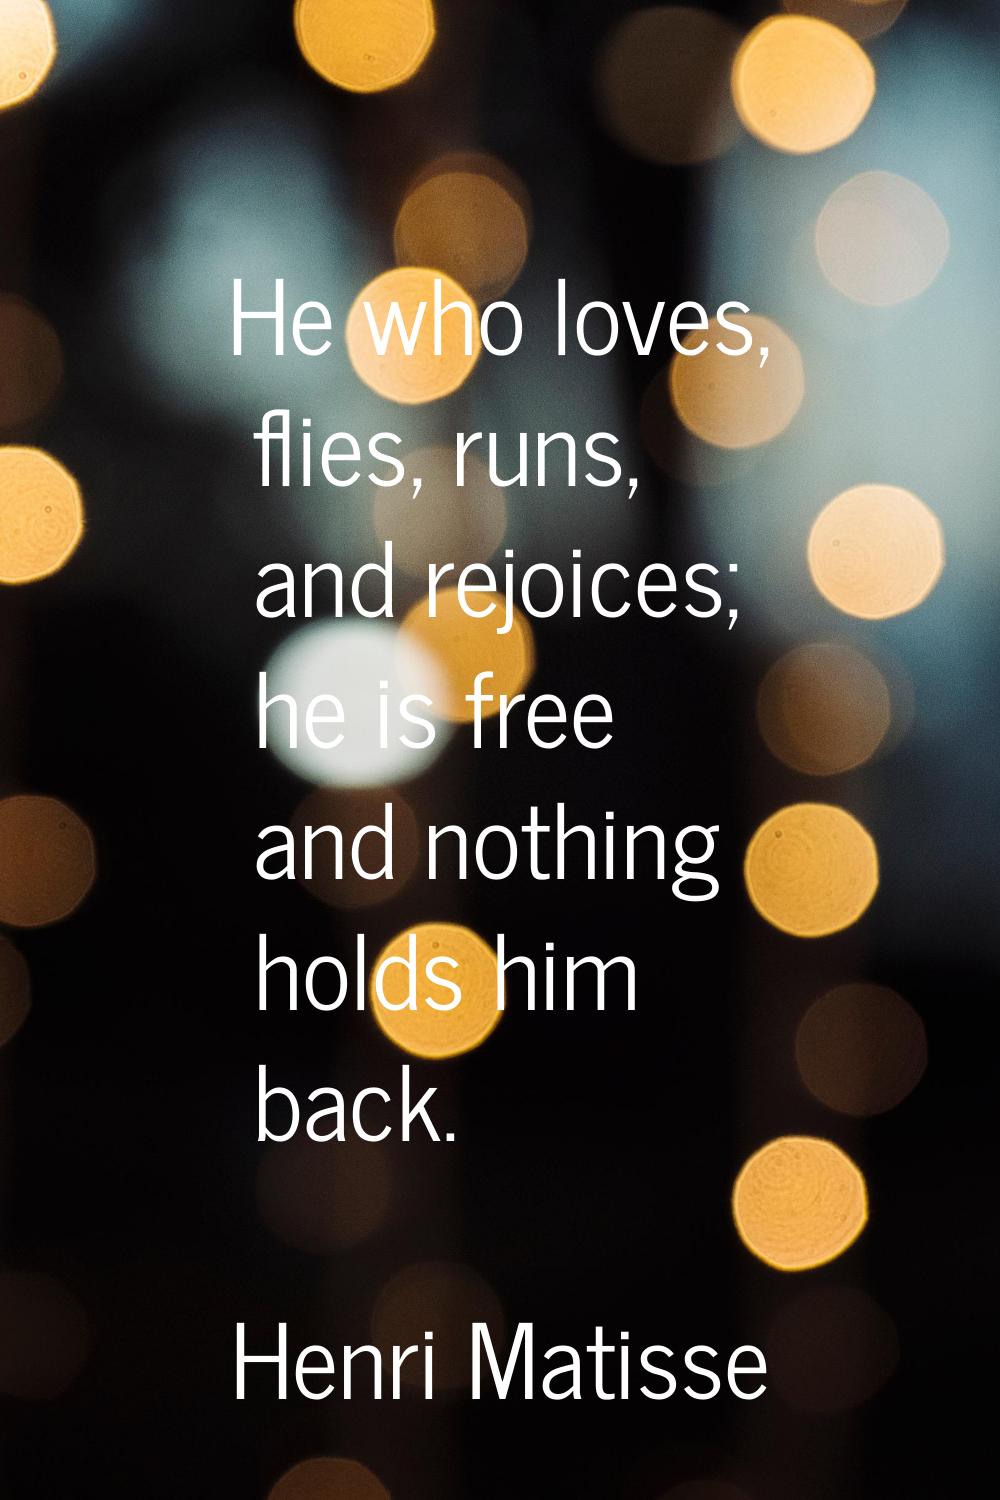 He who loves, flies, runs, and rejoices; he is free and nothing holds him back.